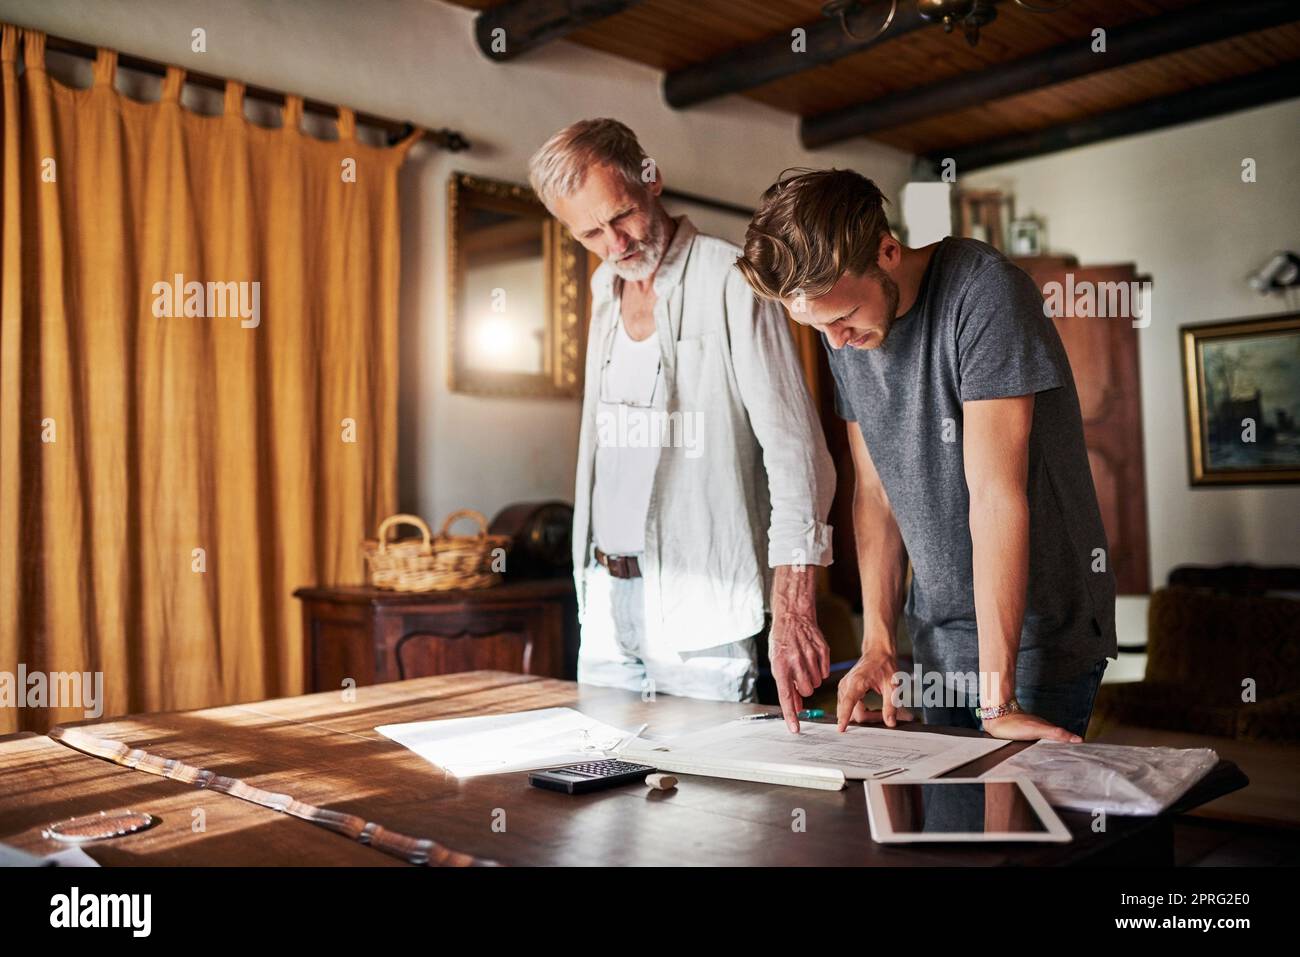 They share a passion for building dreams. two men working on a project together at home. Stock Photo